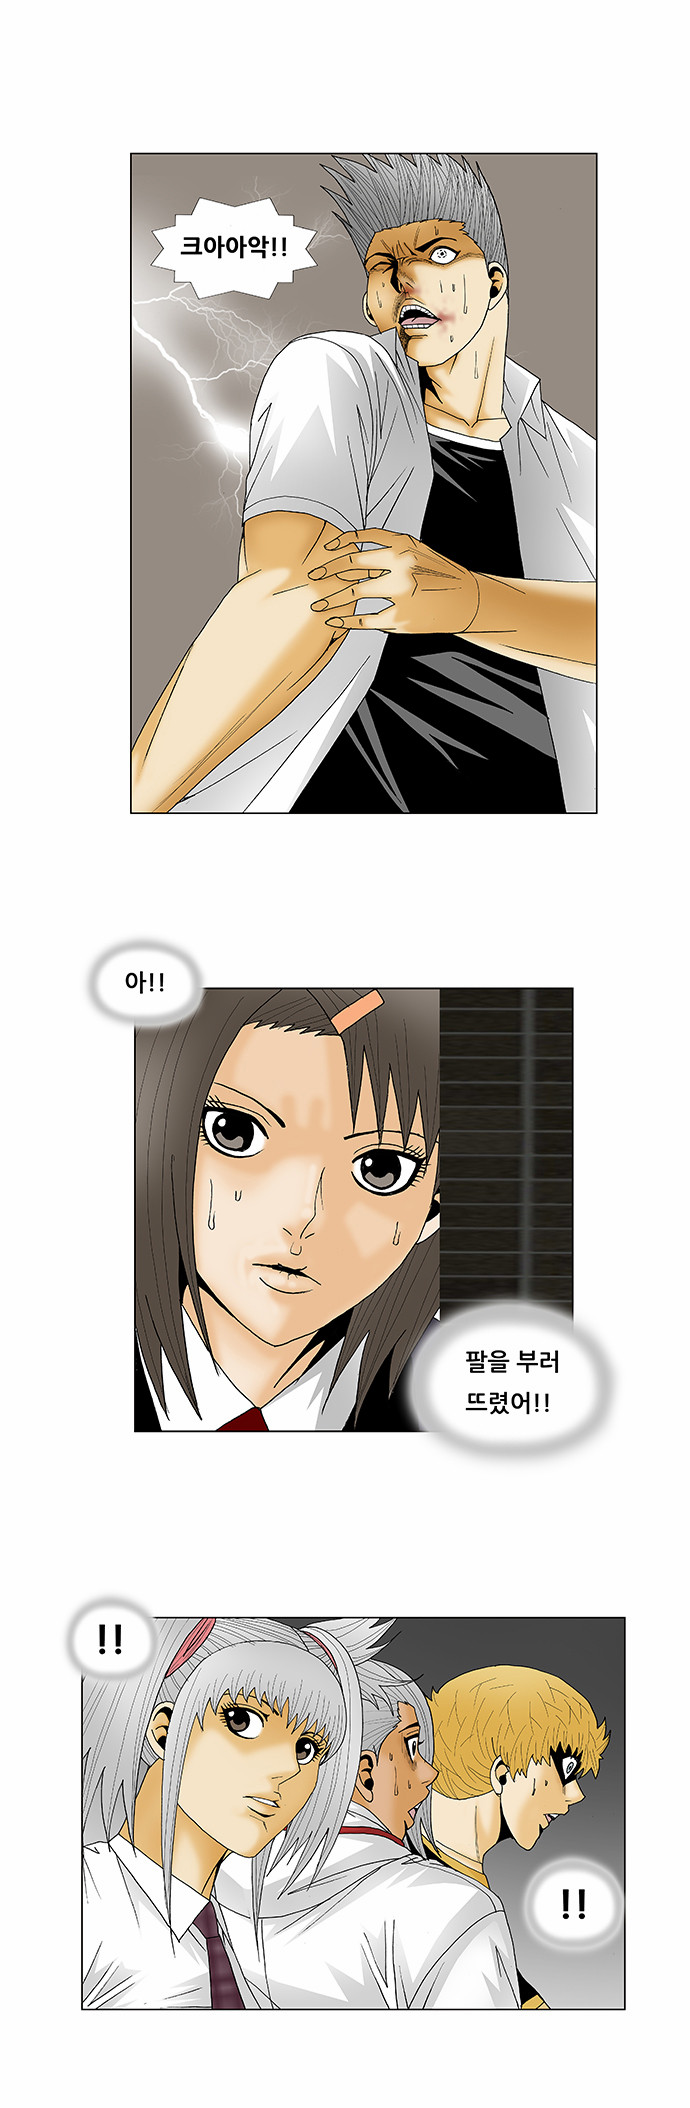 Ultimate Legend - Kang Hae Hyo - Chapter 122 - Page 4